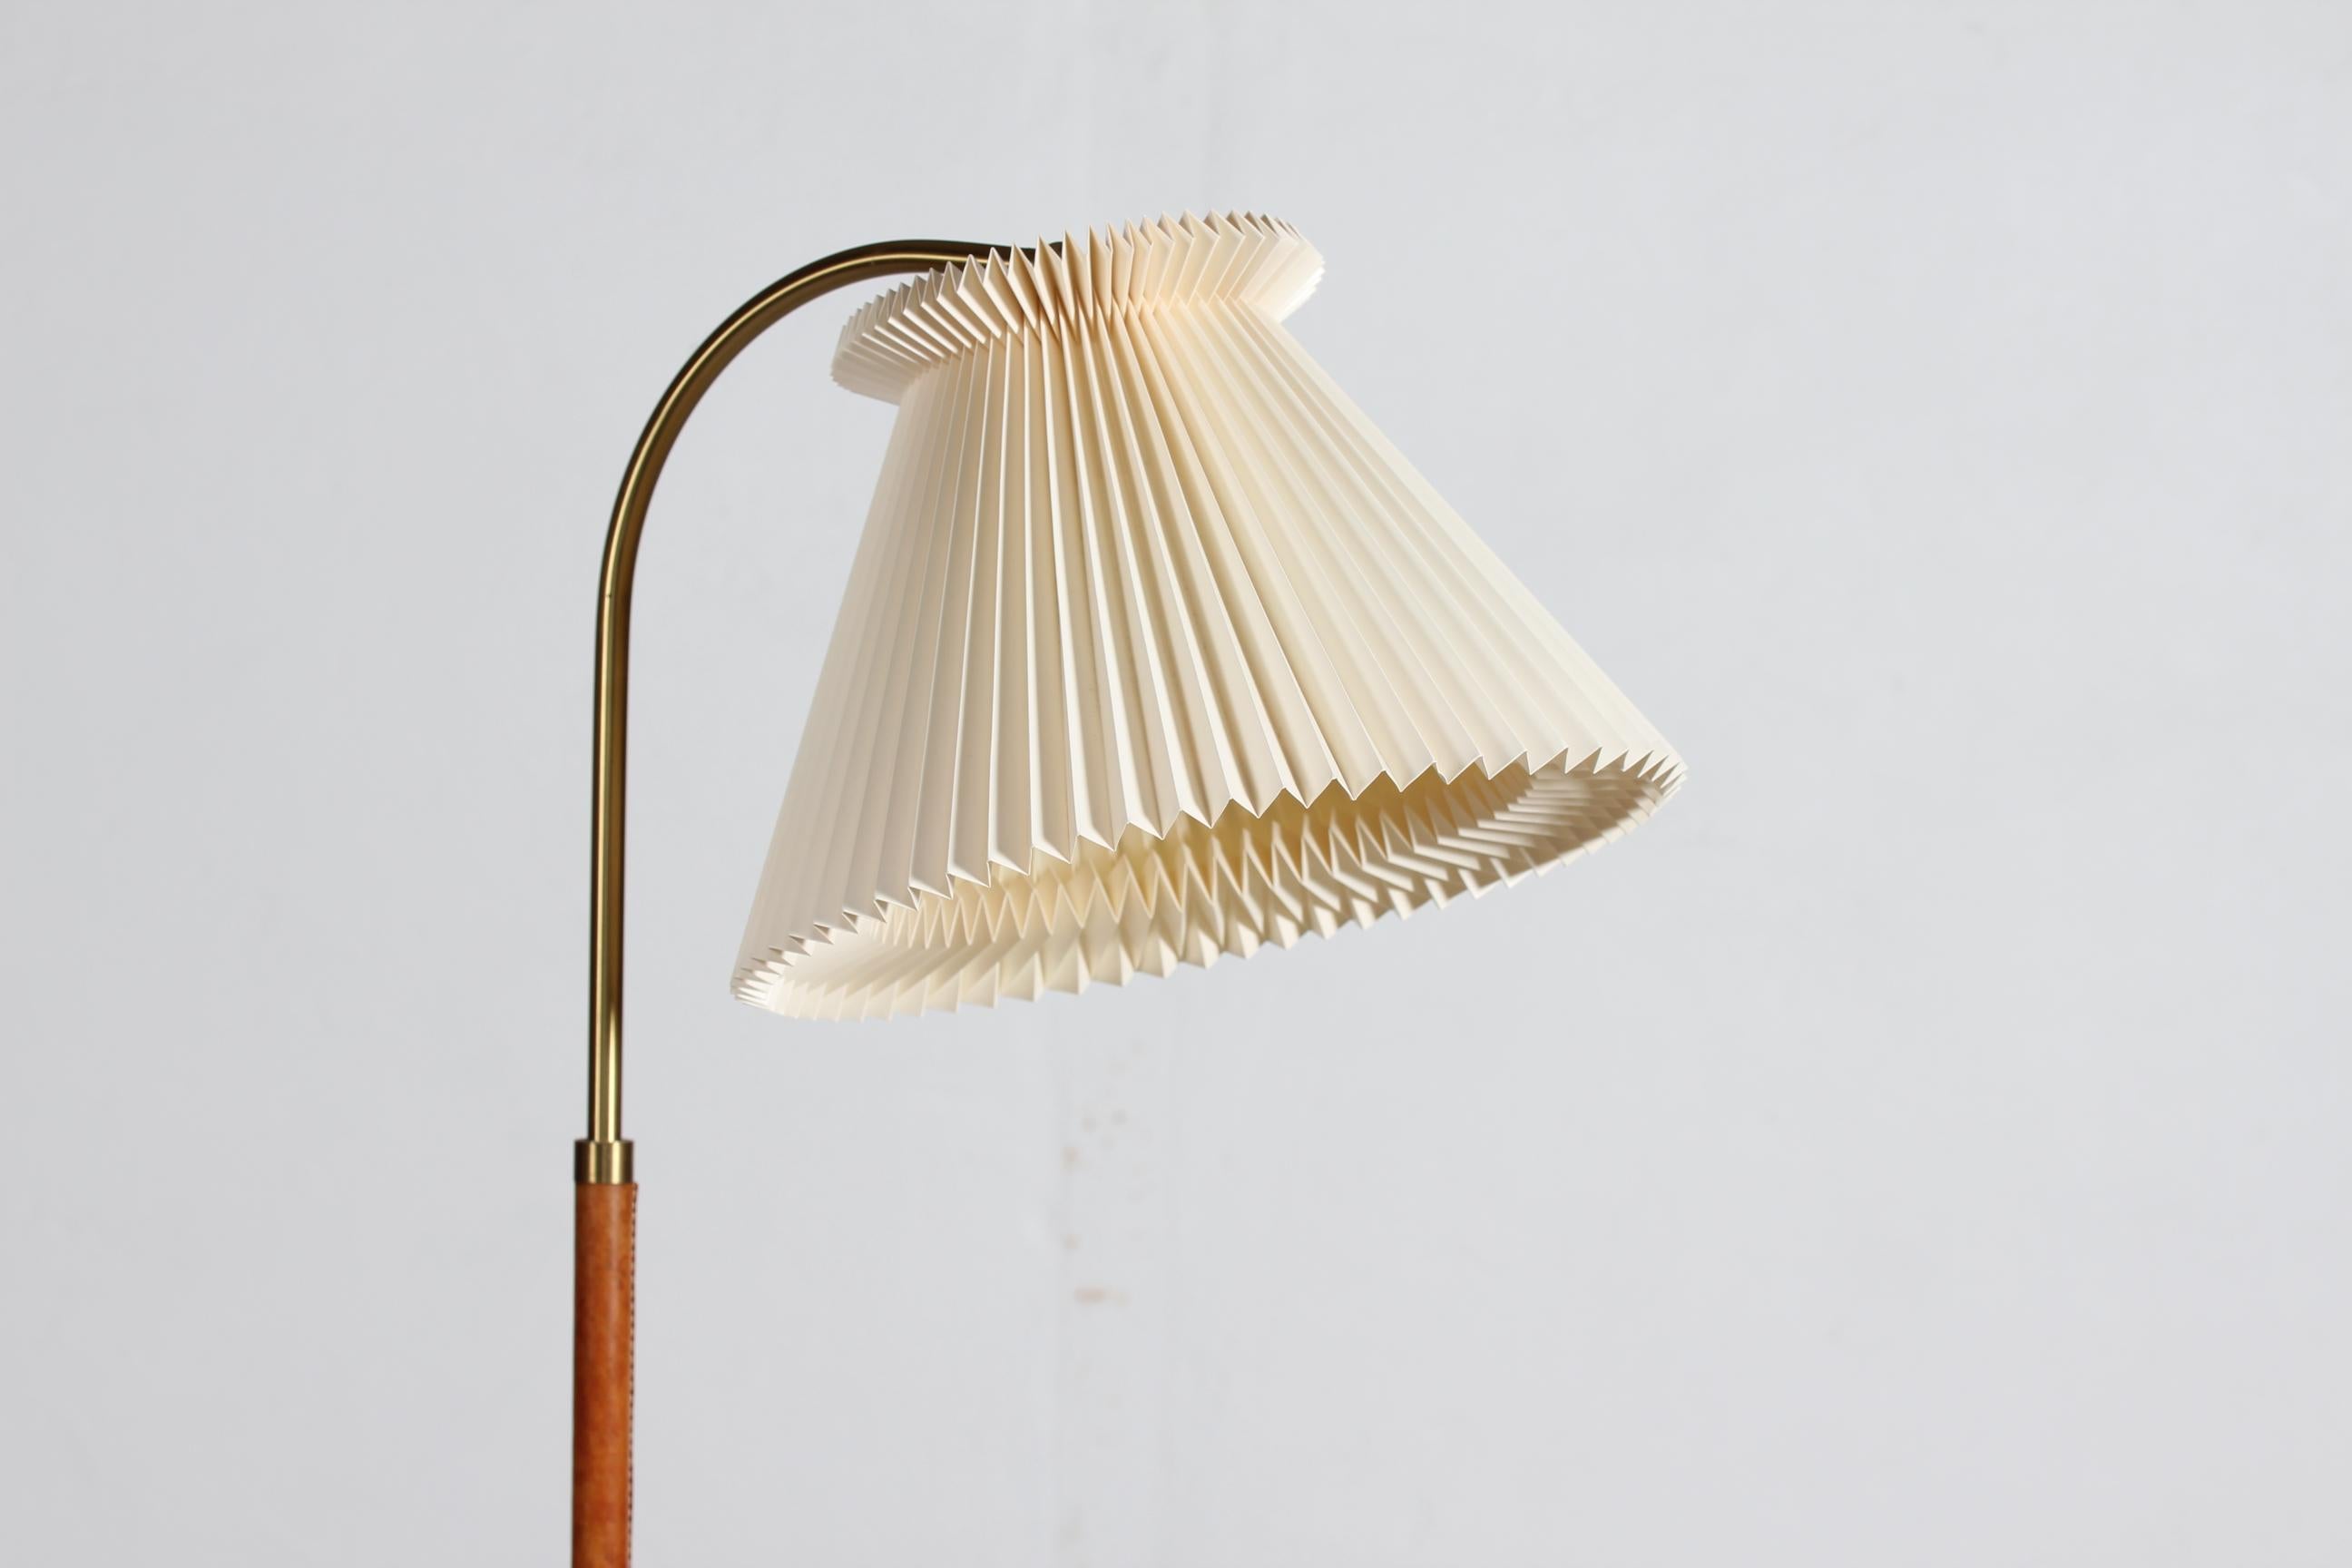 Danish lightning design, floor lamp from the 1950´s with Le Klint lamp shade.

The floor lamp is made of brass with strong cognac colored leather winding. The height of the lamp and the angle of the lamp shade i adjustable.

Measures: Height